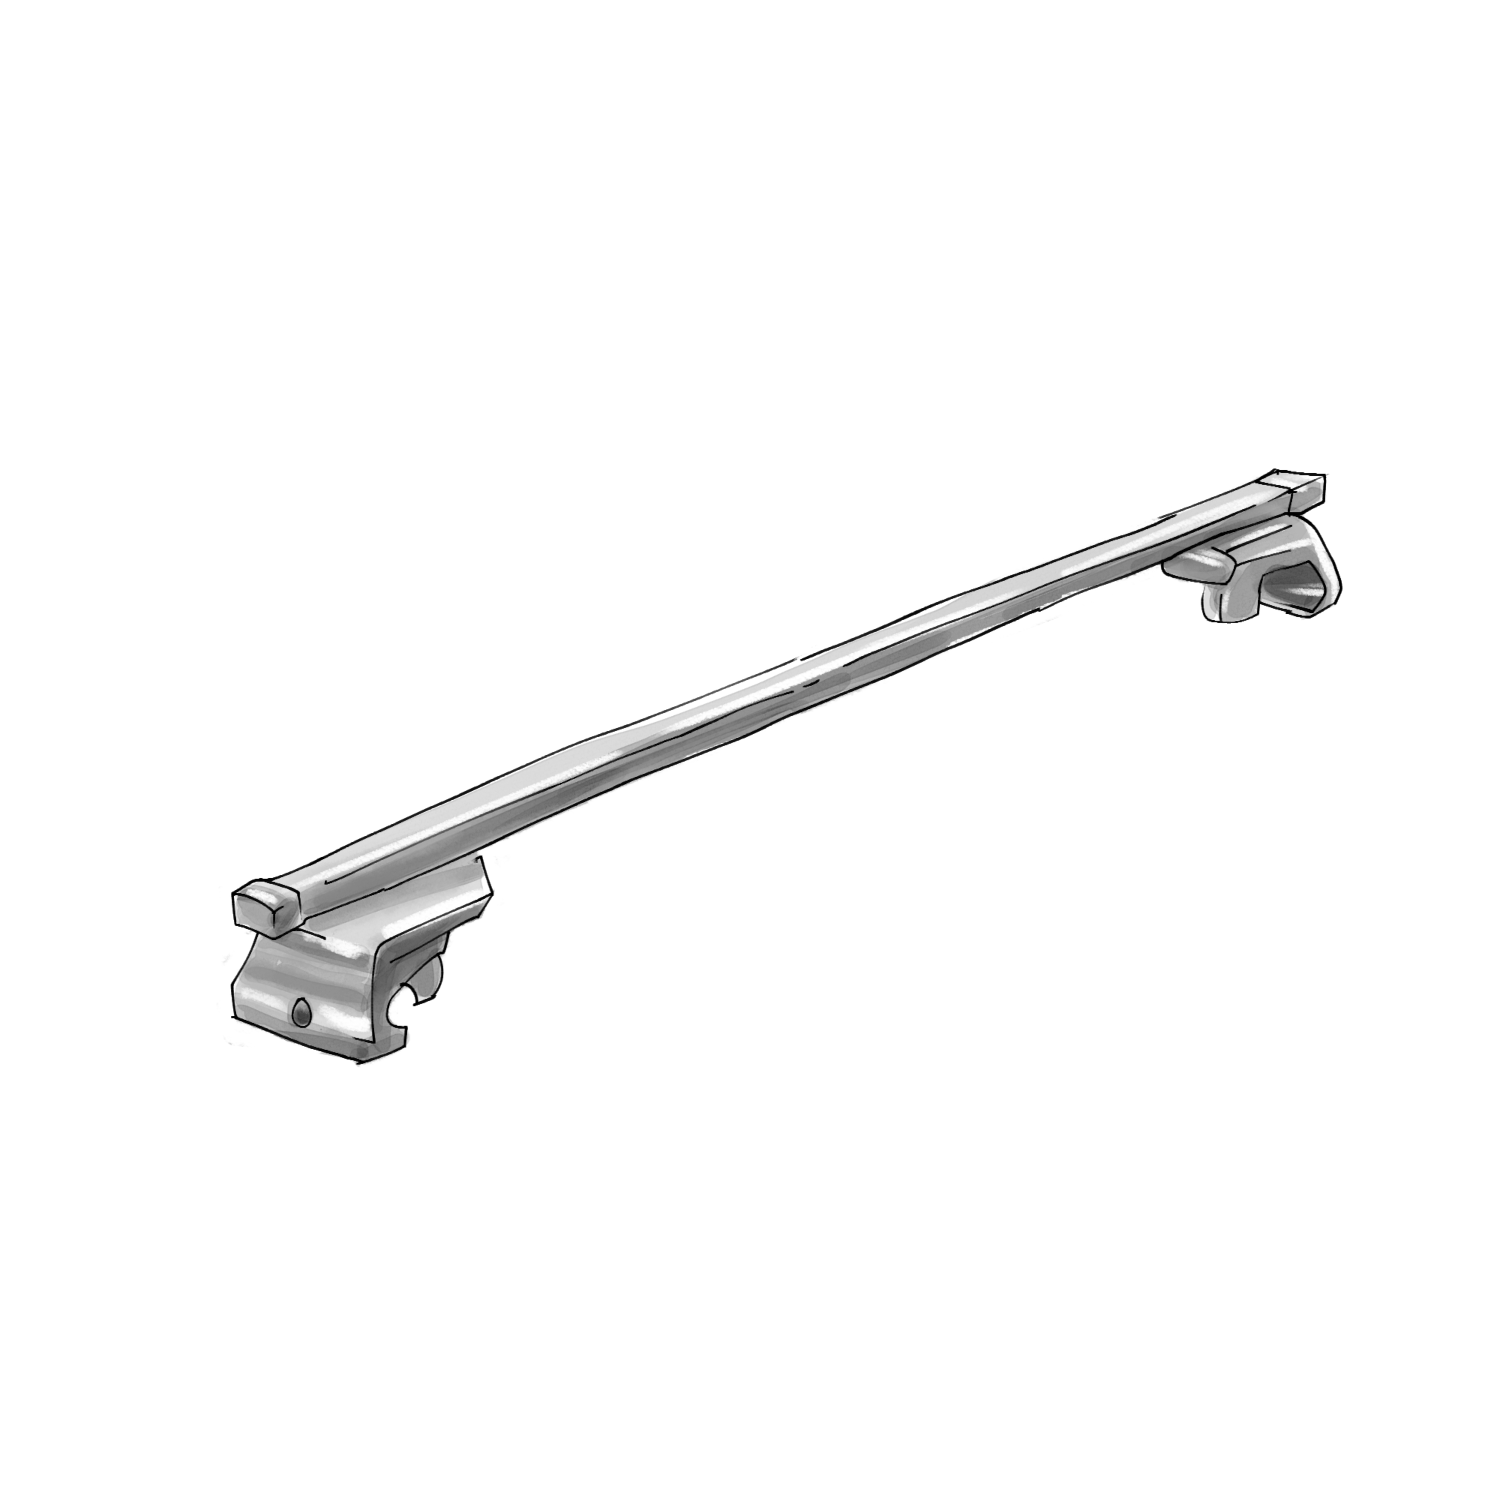  Product image 1 of the product “Roof rack universal ”